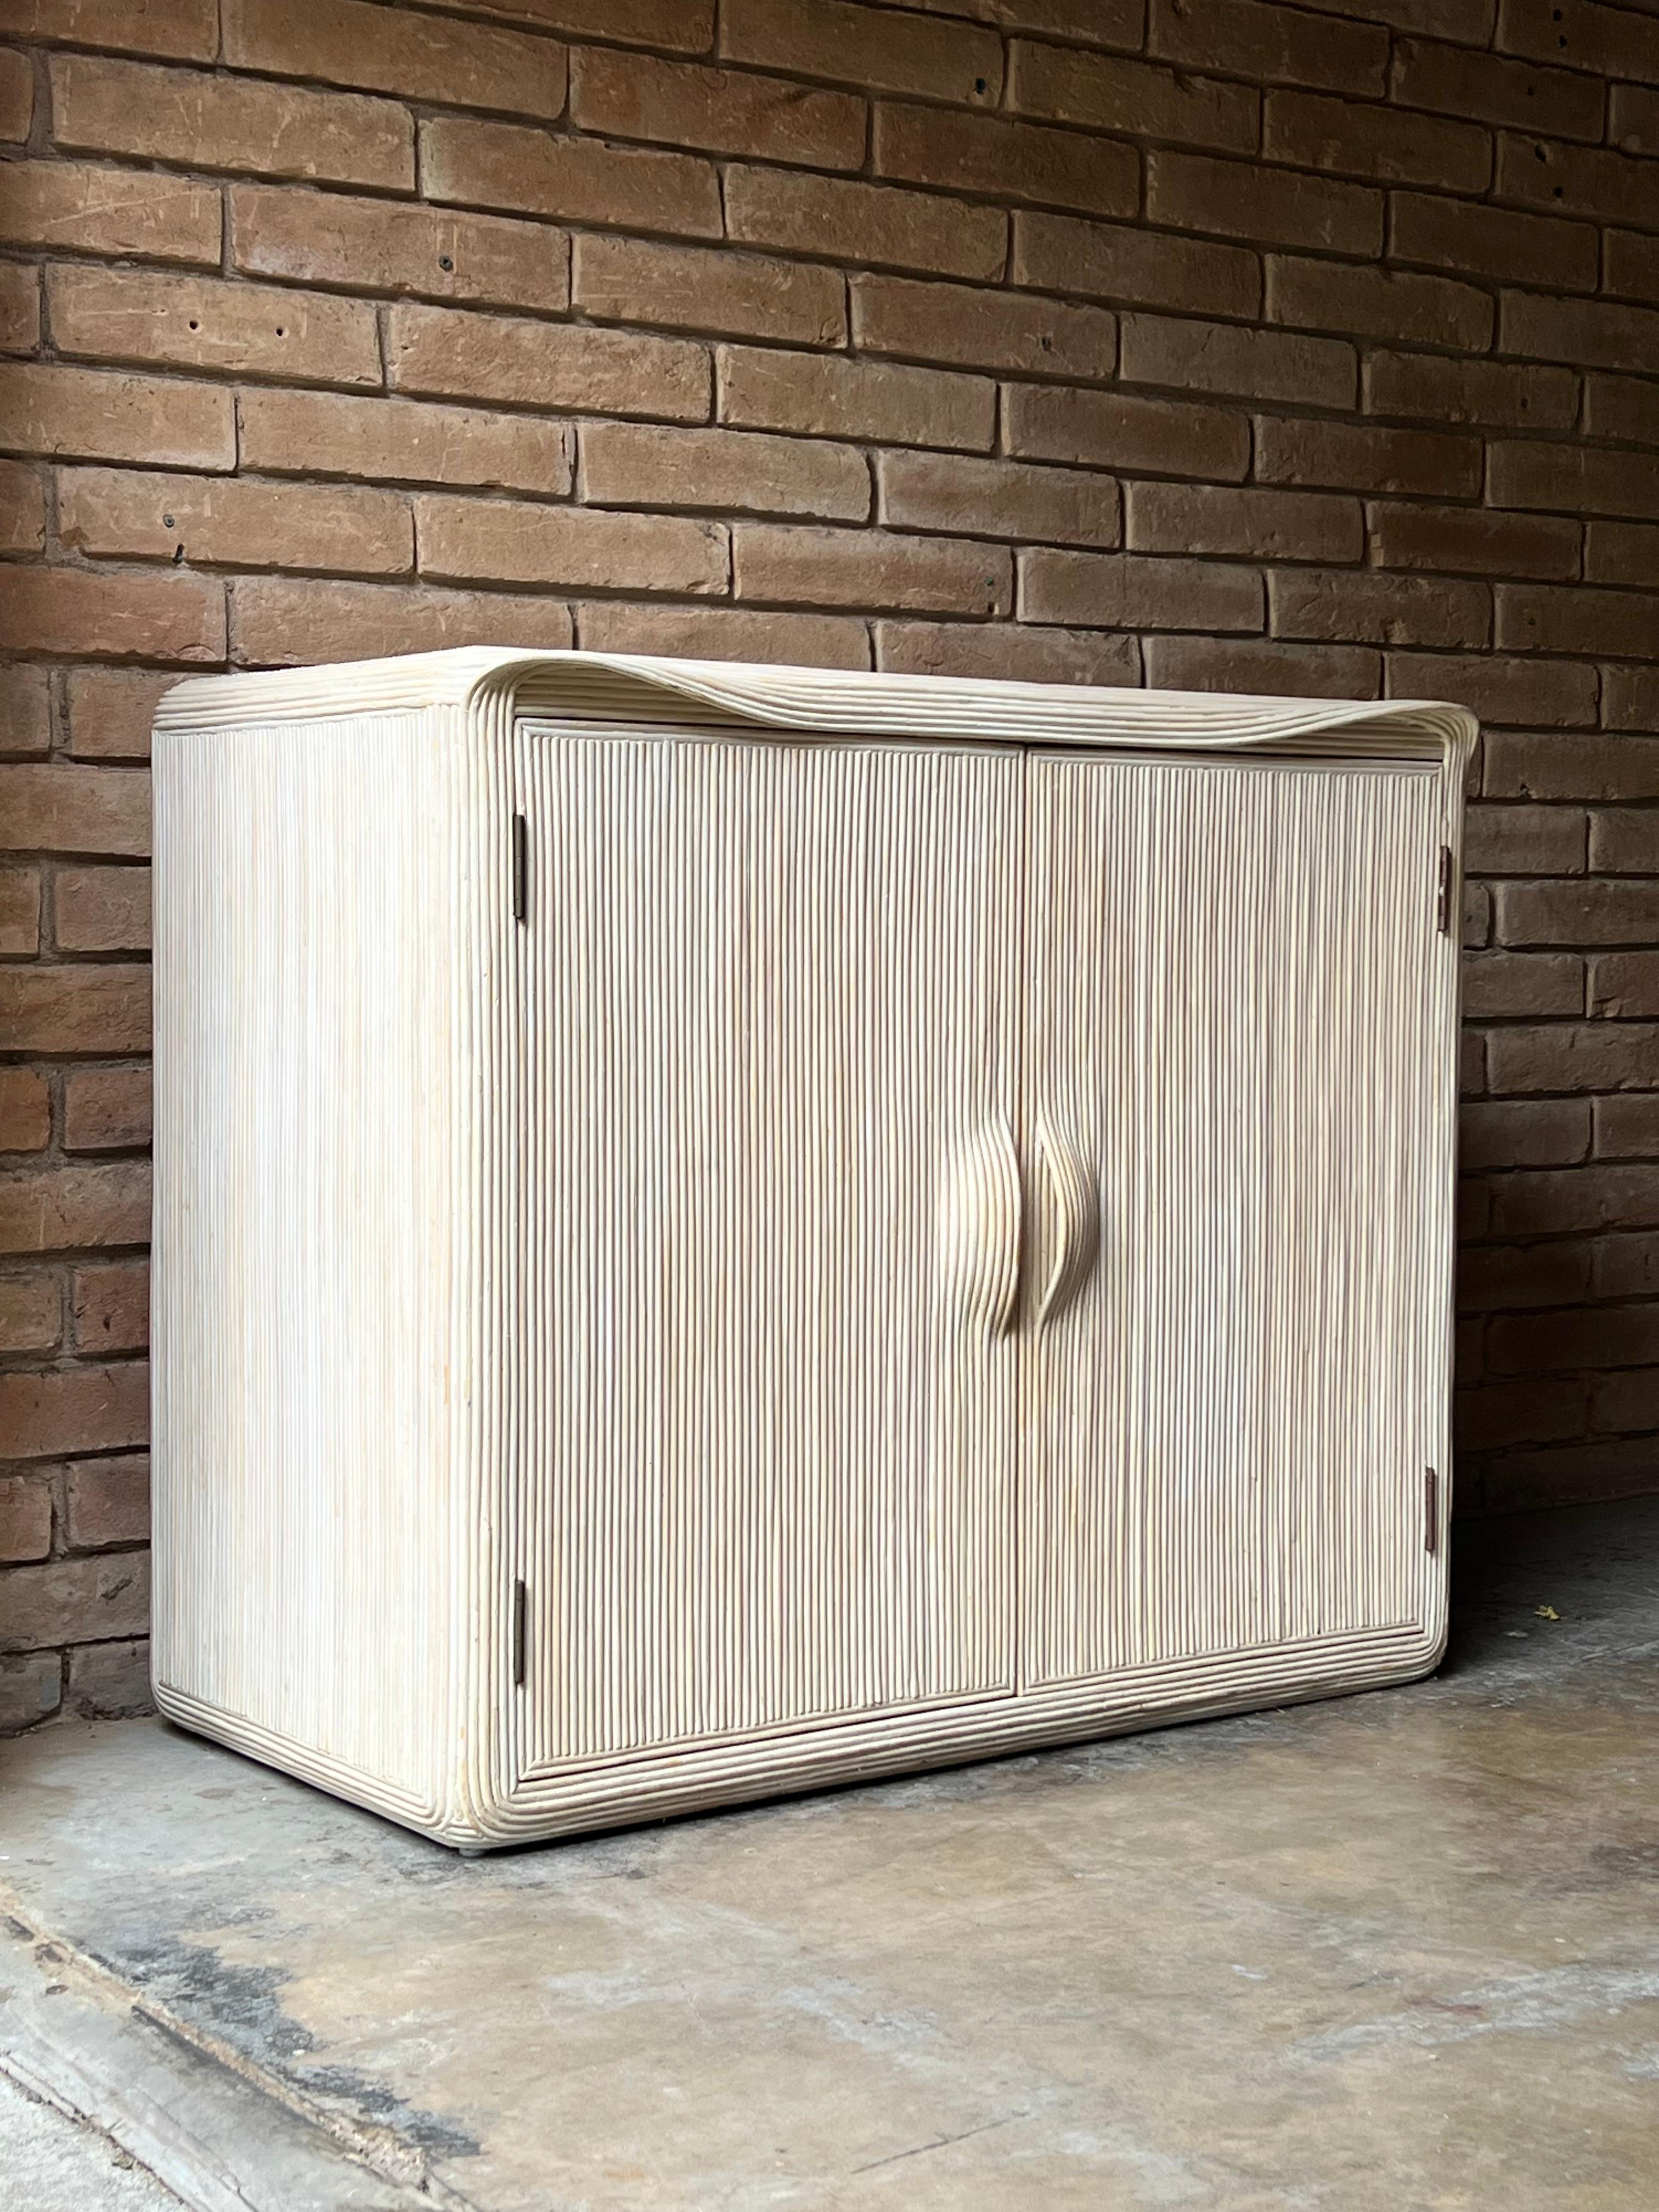 Beautiful and whimsical cabinet attributed to Betty Cobobpue. Made from a white washed reed, this functional yet sculptural piece features a single fixed interior shelf and offers ample deep storage. 

Can be used for linens, blankets or everyday